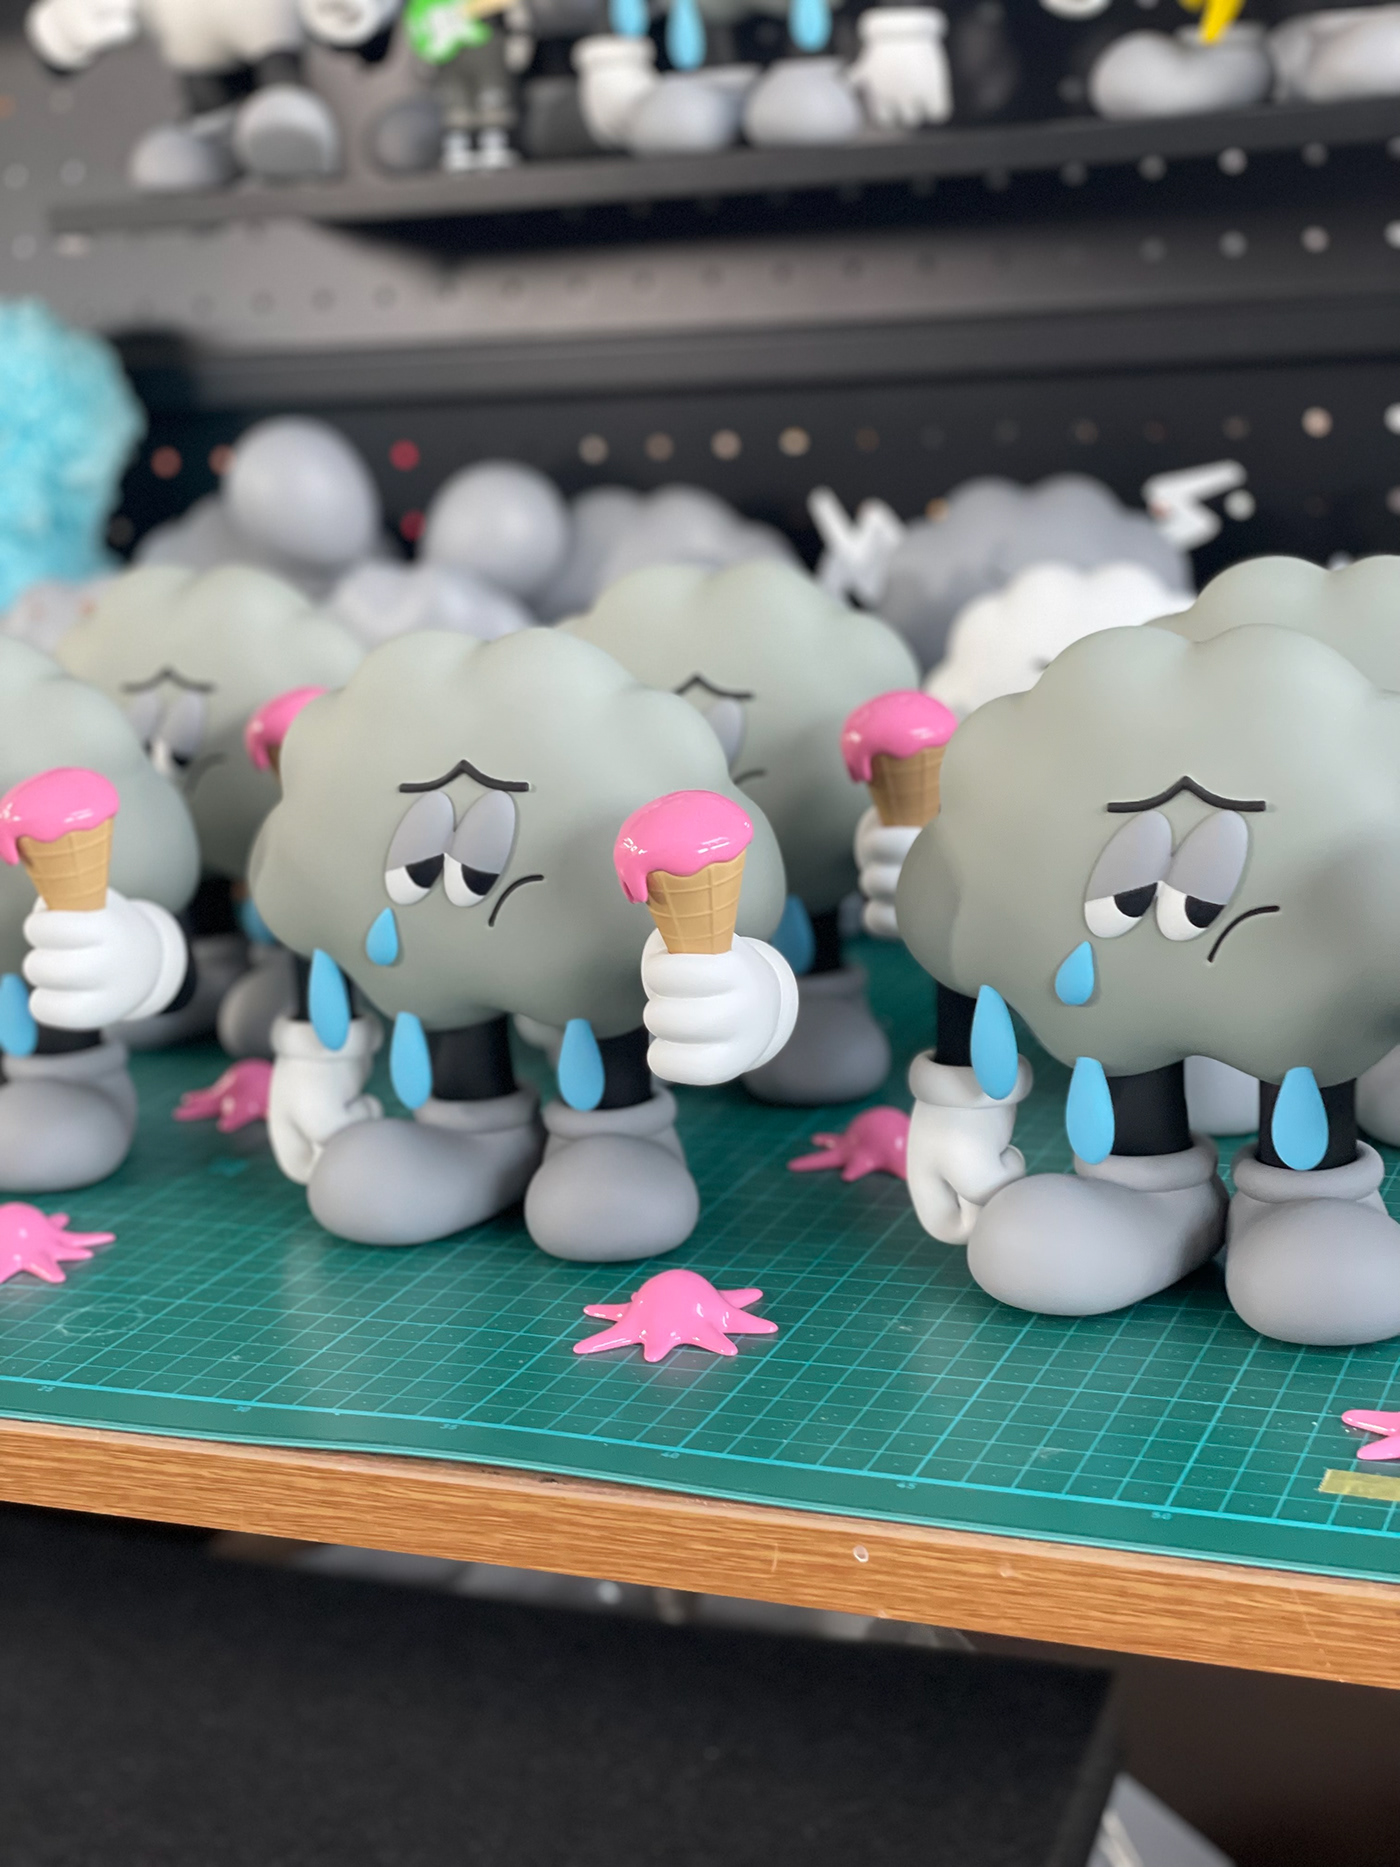 designertoy arttoys resintoy cloud weather Character emotion release kidult Collection figure